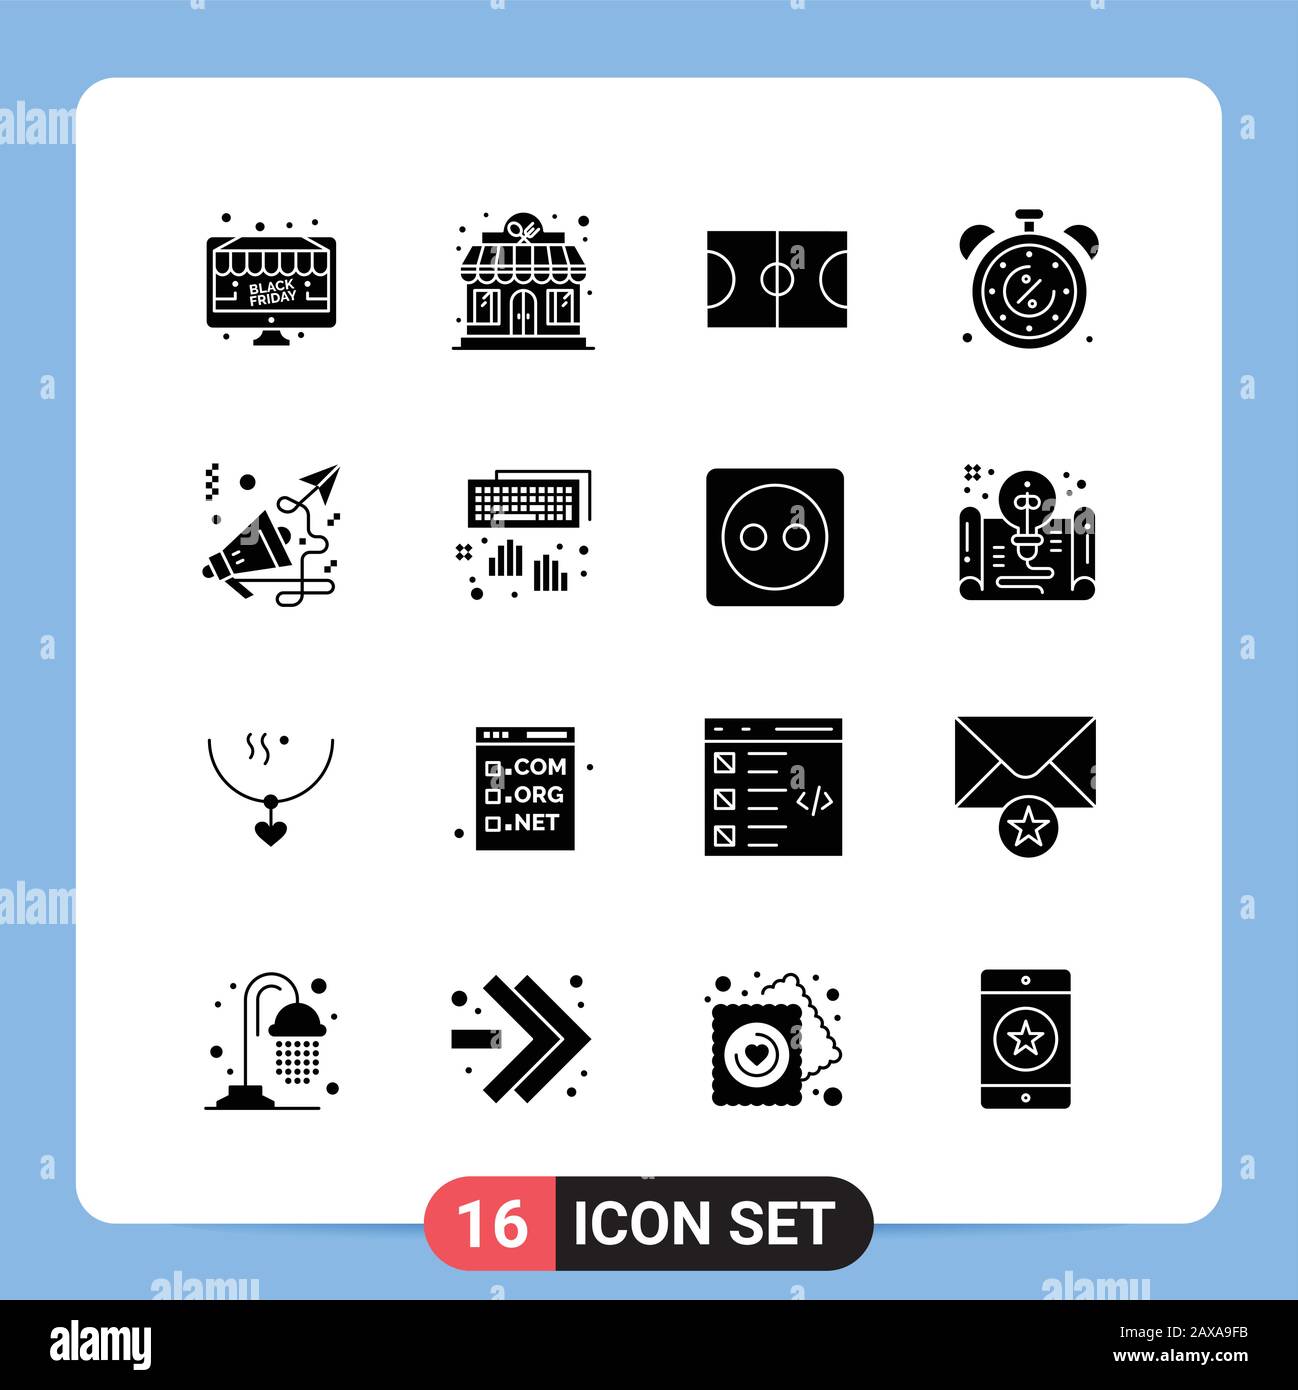 16 Solid Black Icon Pack Glyph Symbols for Mobile Apps isolated on ...